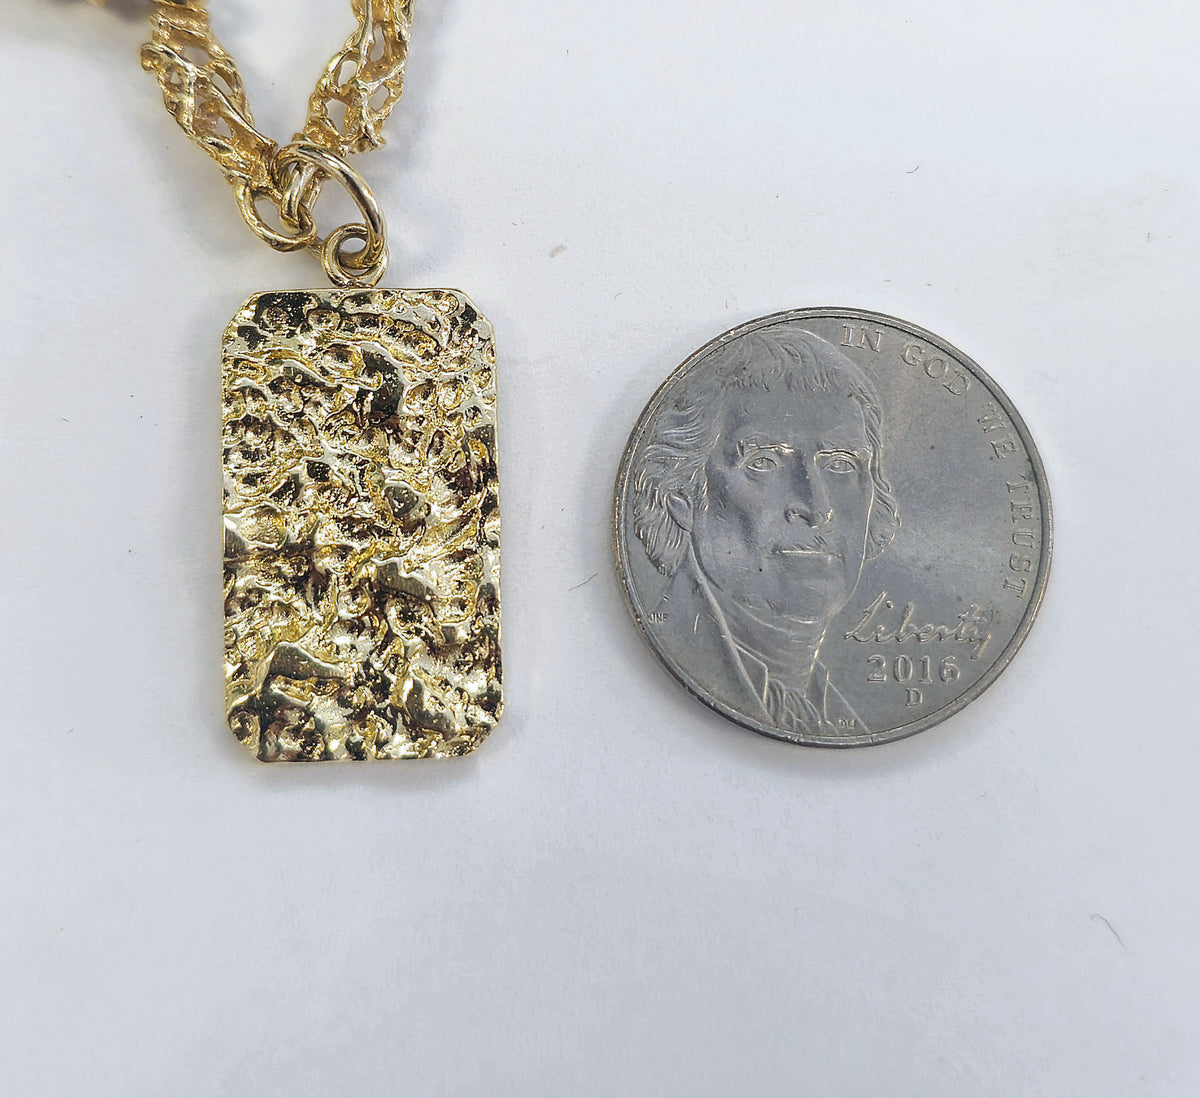 Nugget pendant and chain made in solid 14-karat yellow gold 18 inches